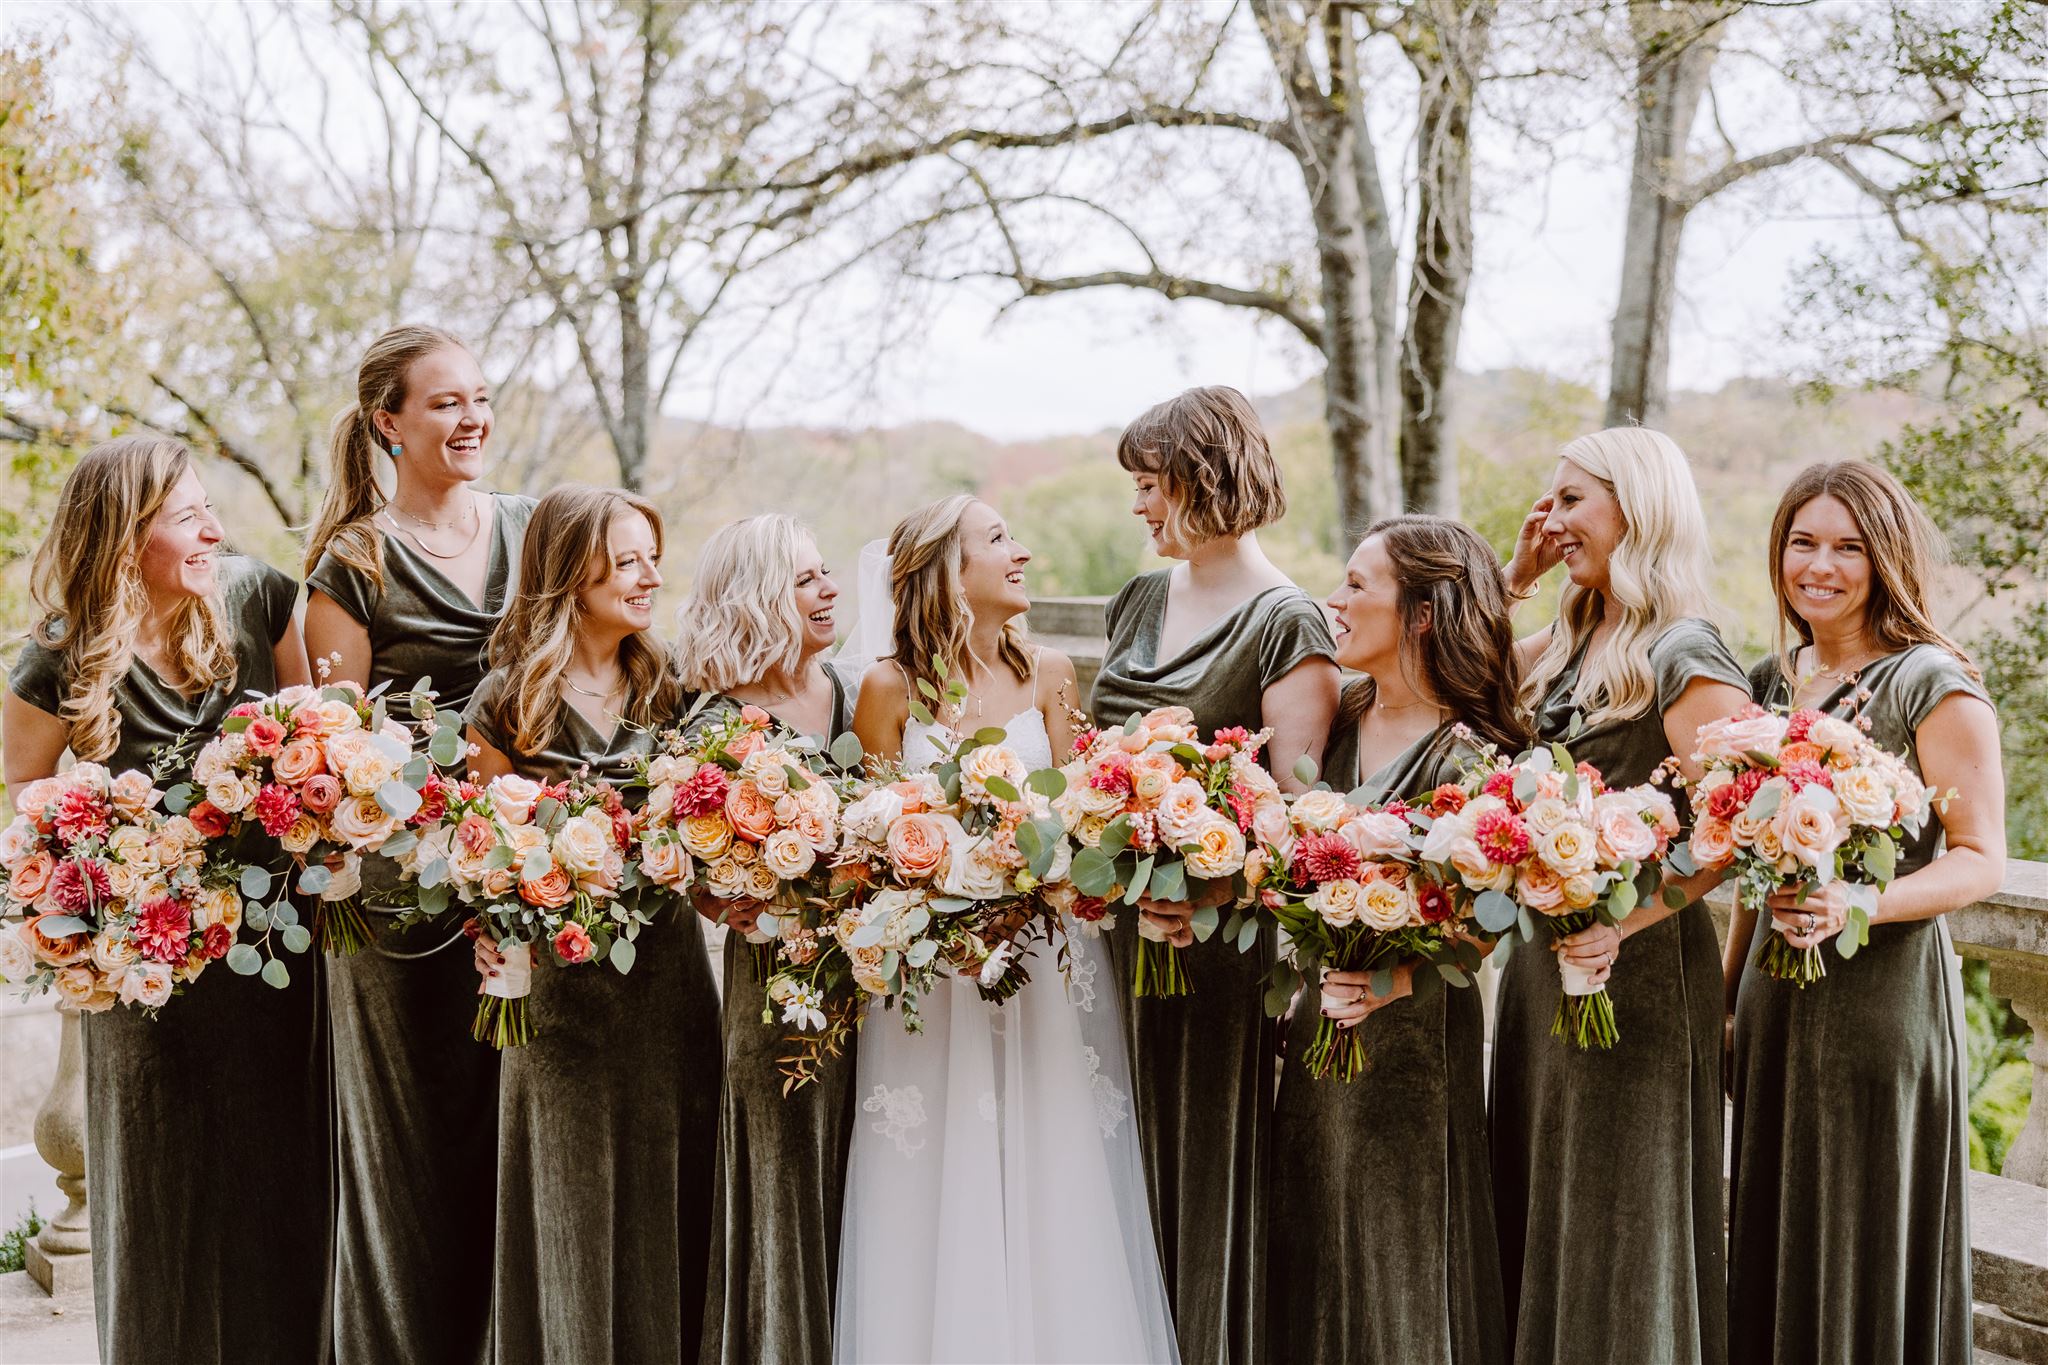 Dress Your Bridesmaids Up to the Nines at Bella Bridesmaids in Brentwood